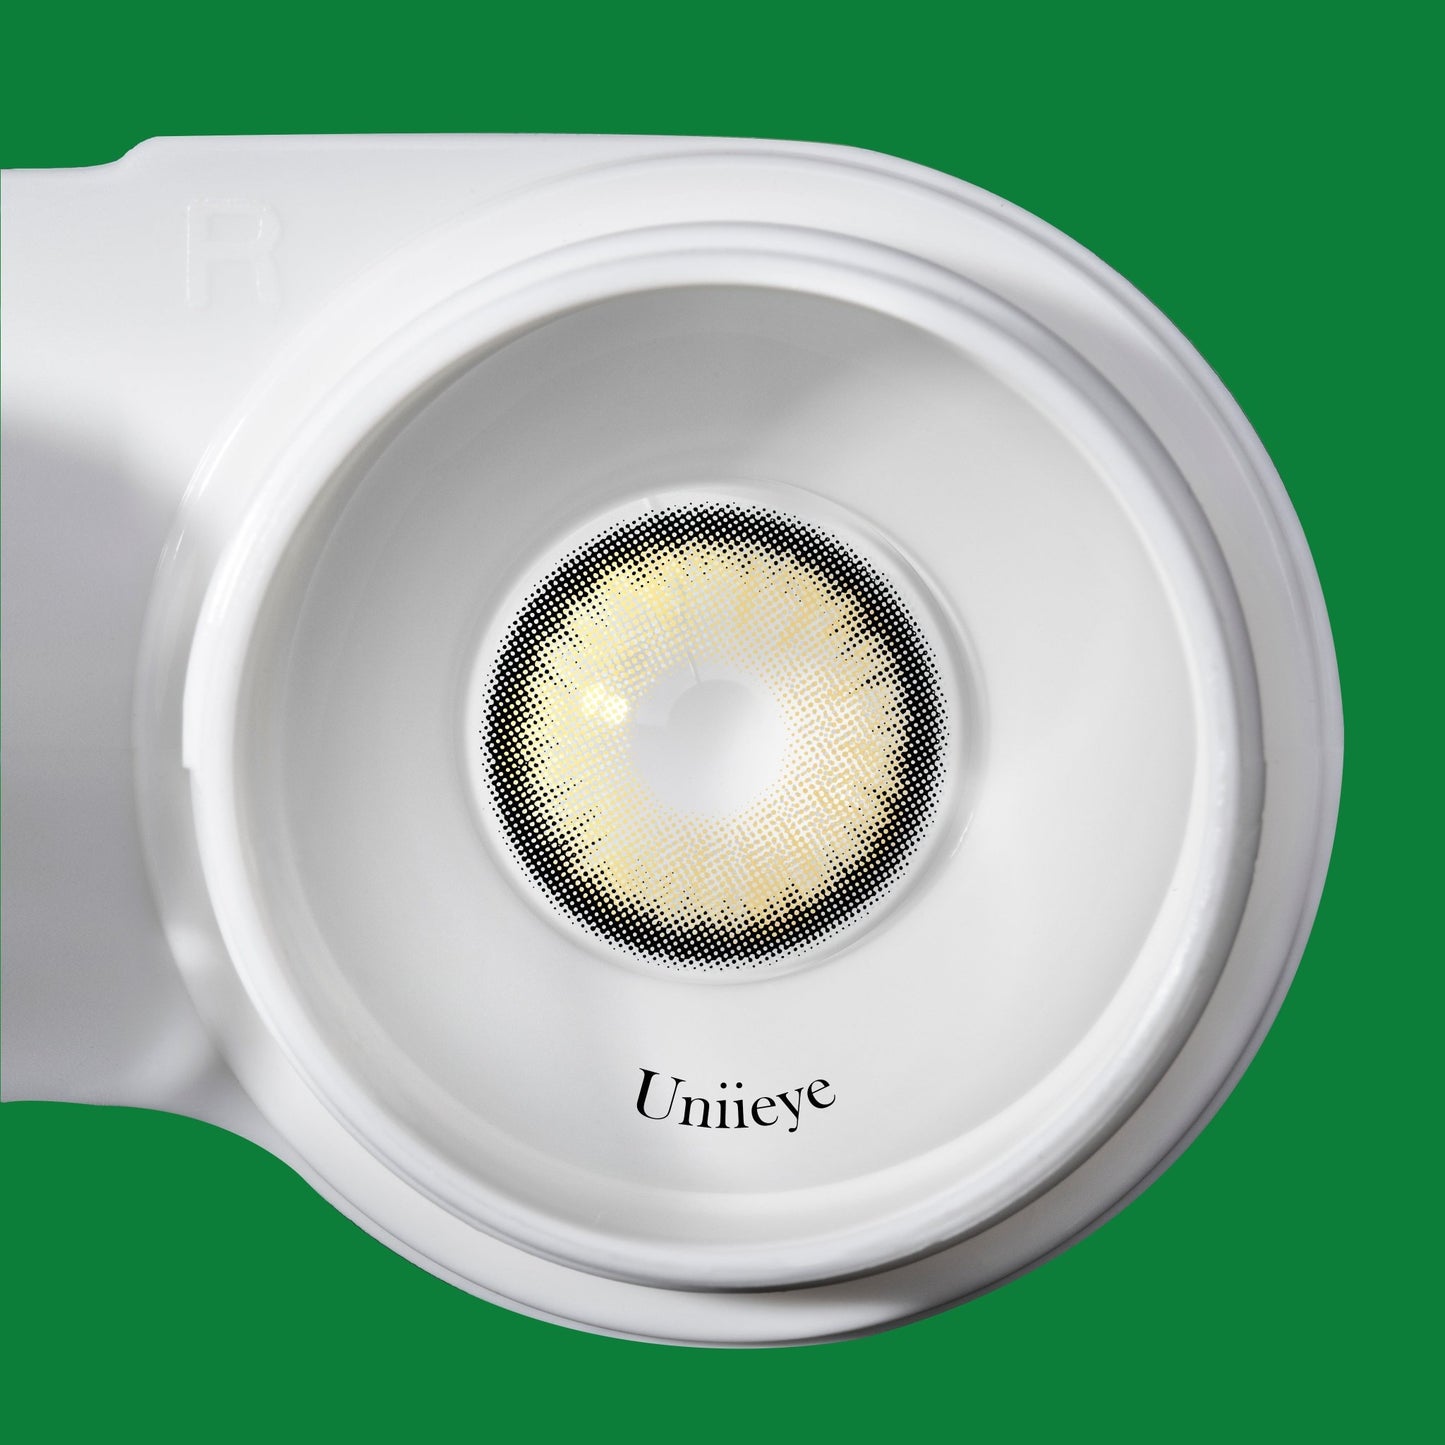 Dawn Brown Colored Contact Lenses - Uniieye